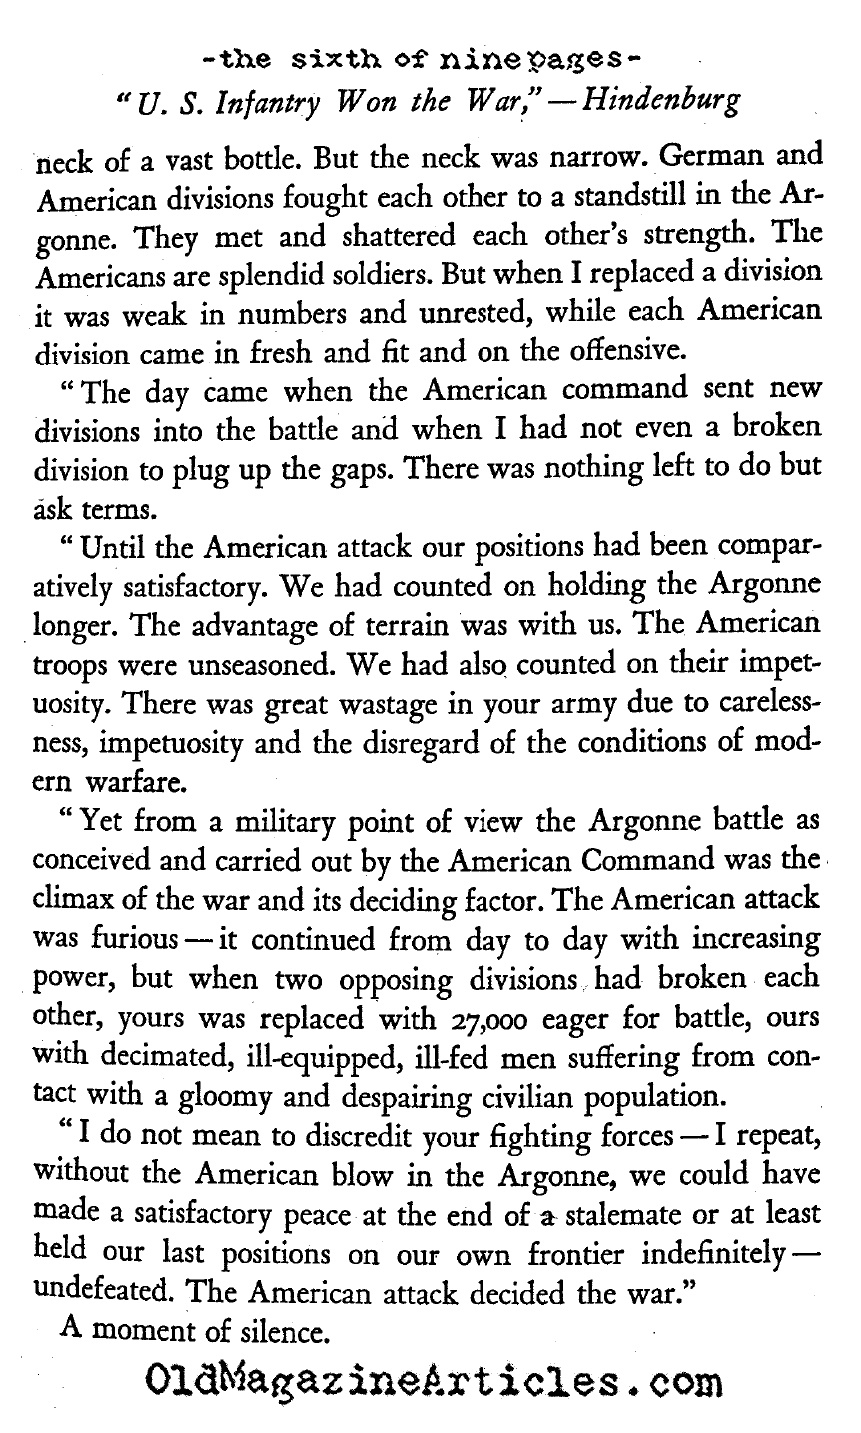 ''The Americans in the Argonne Won the War'' <BR>(You Can't Print That, 1929)